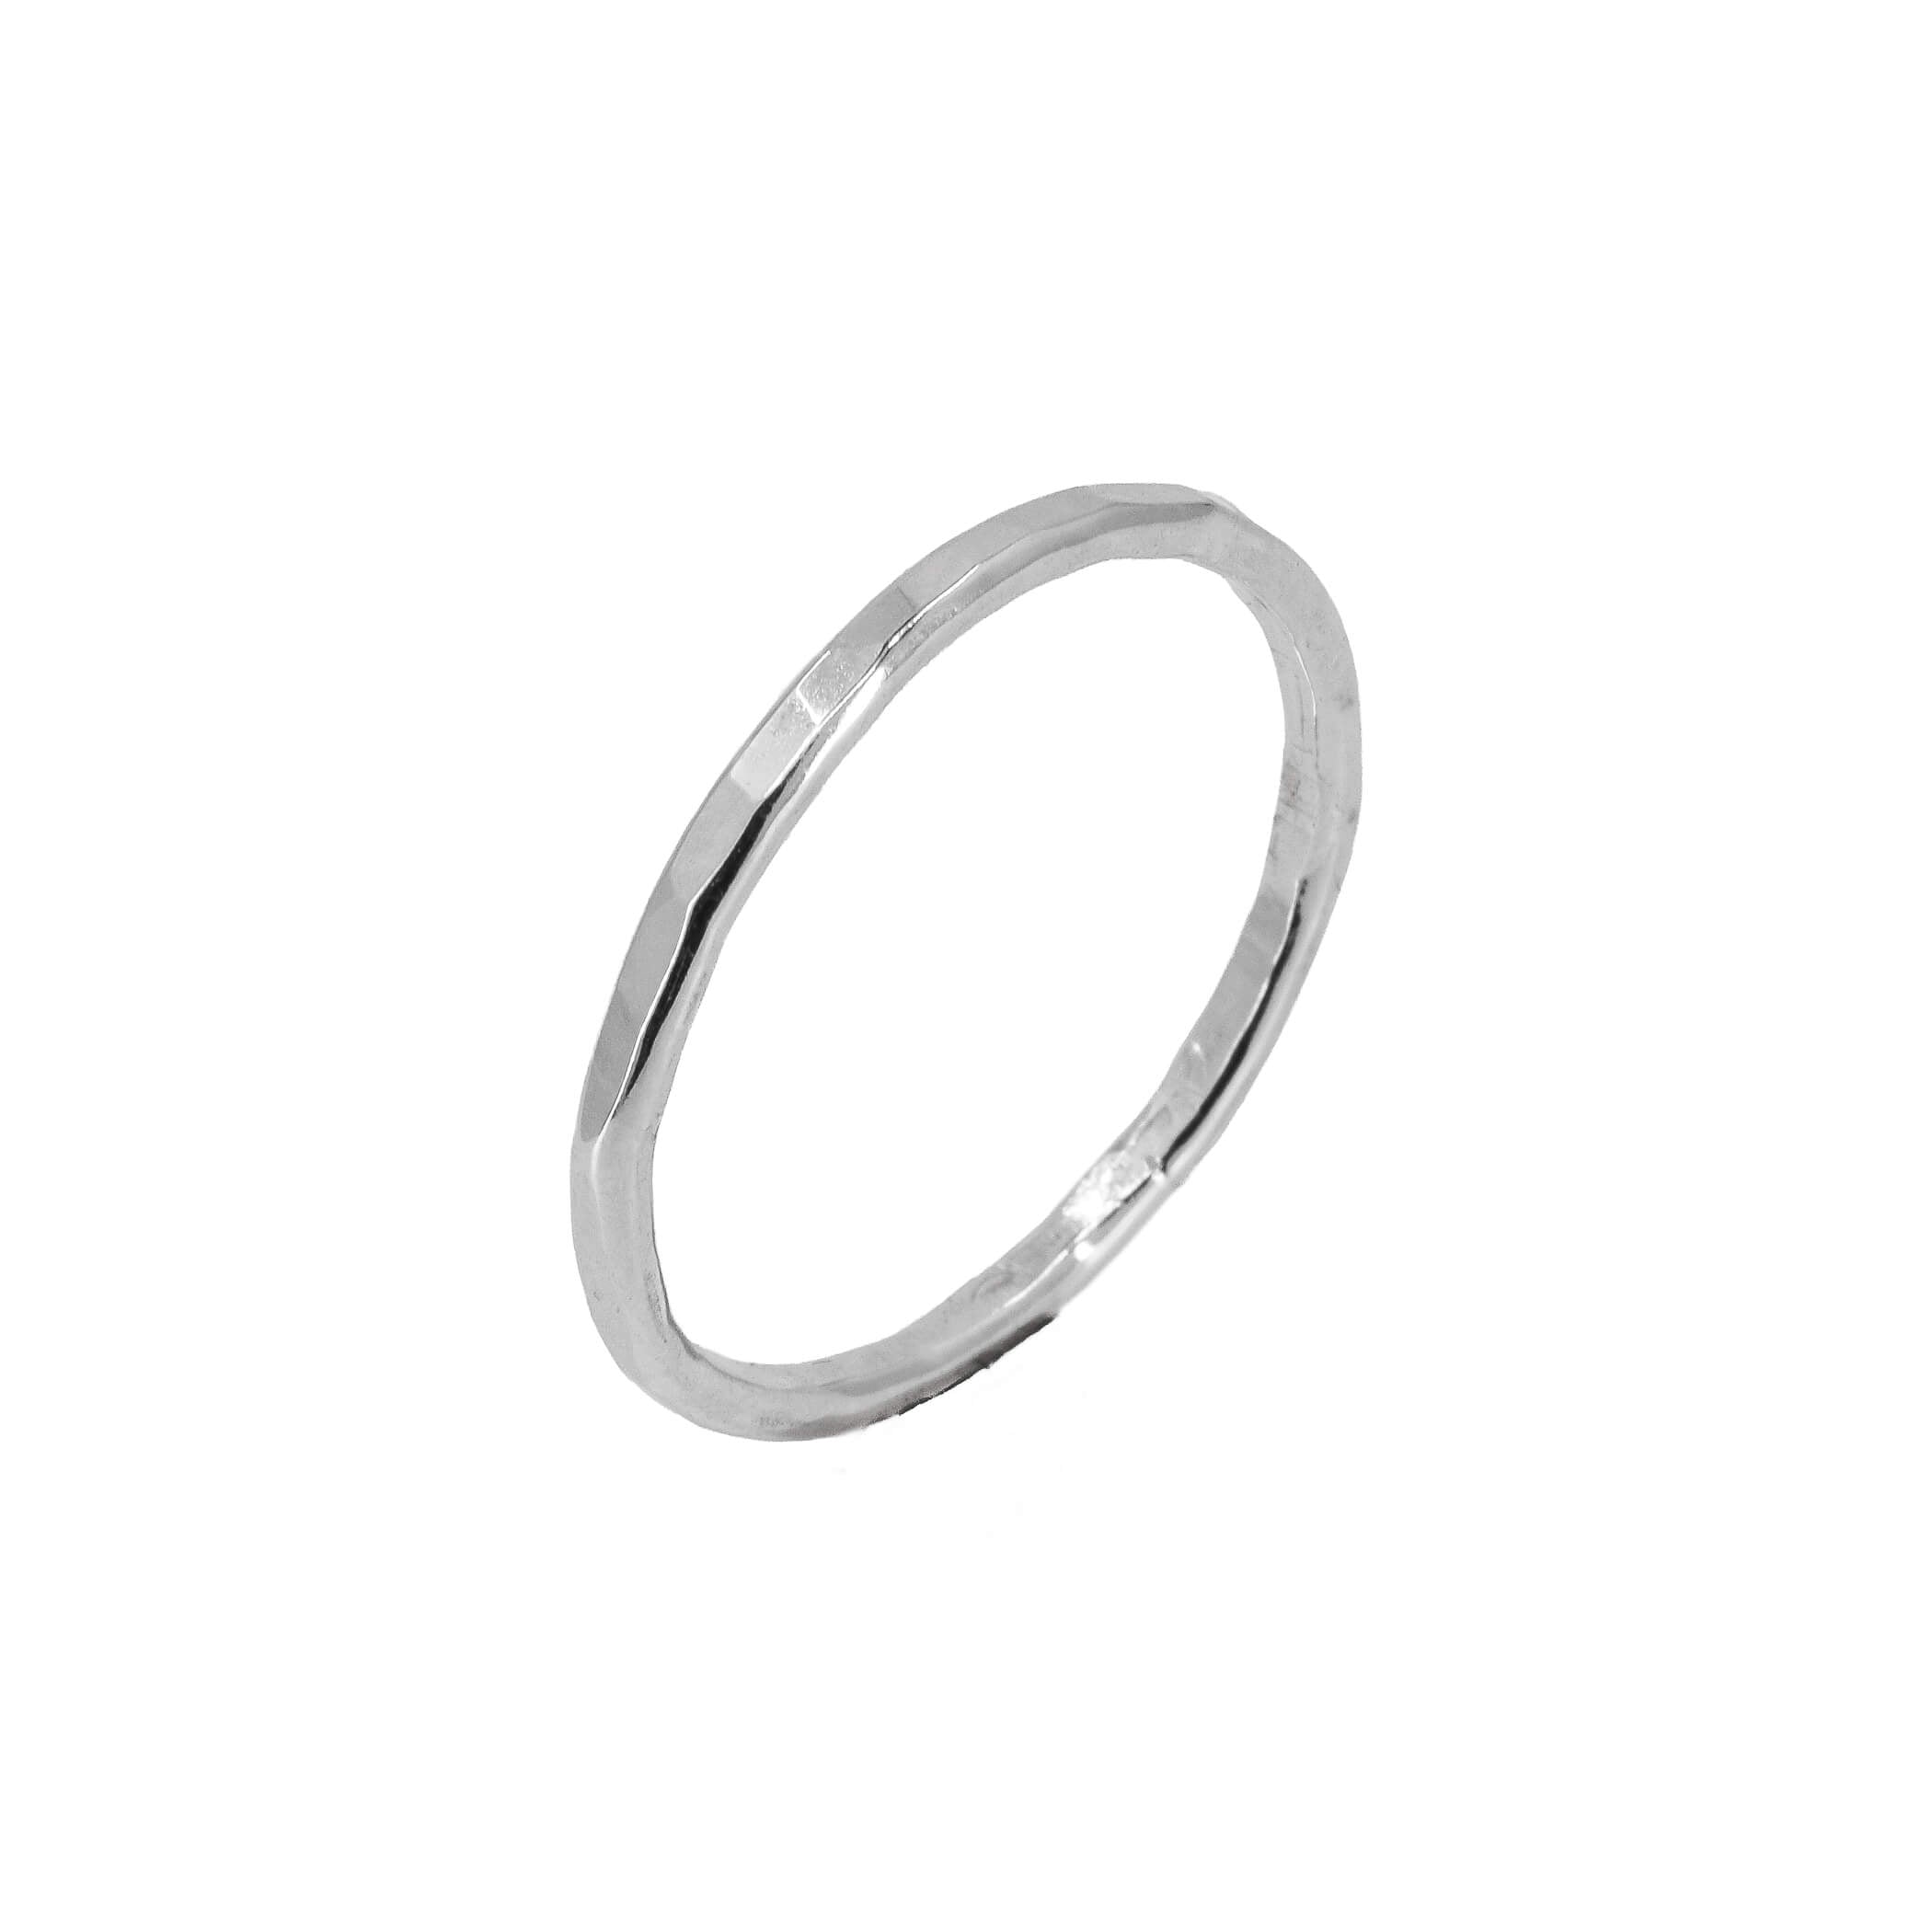 Thin faceted sterling silver stacking ring side view